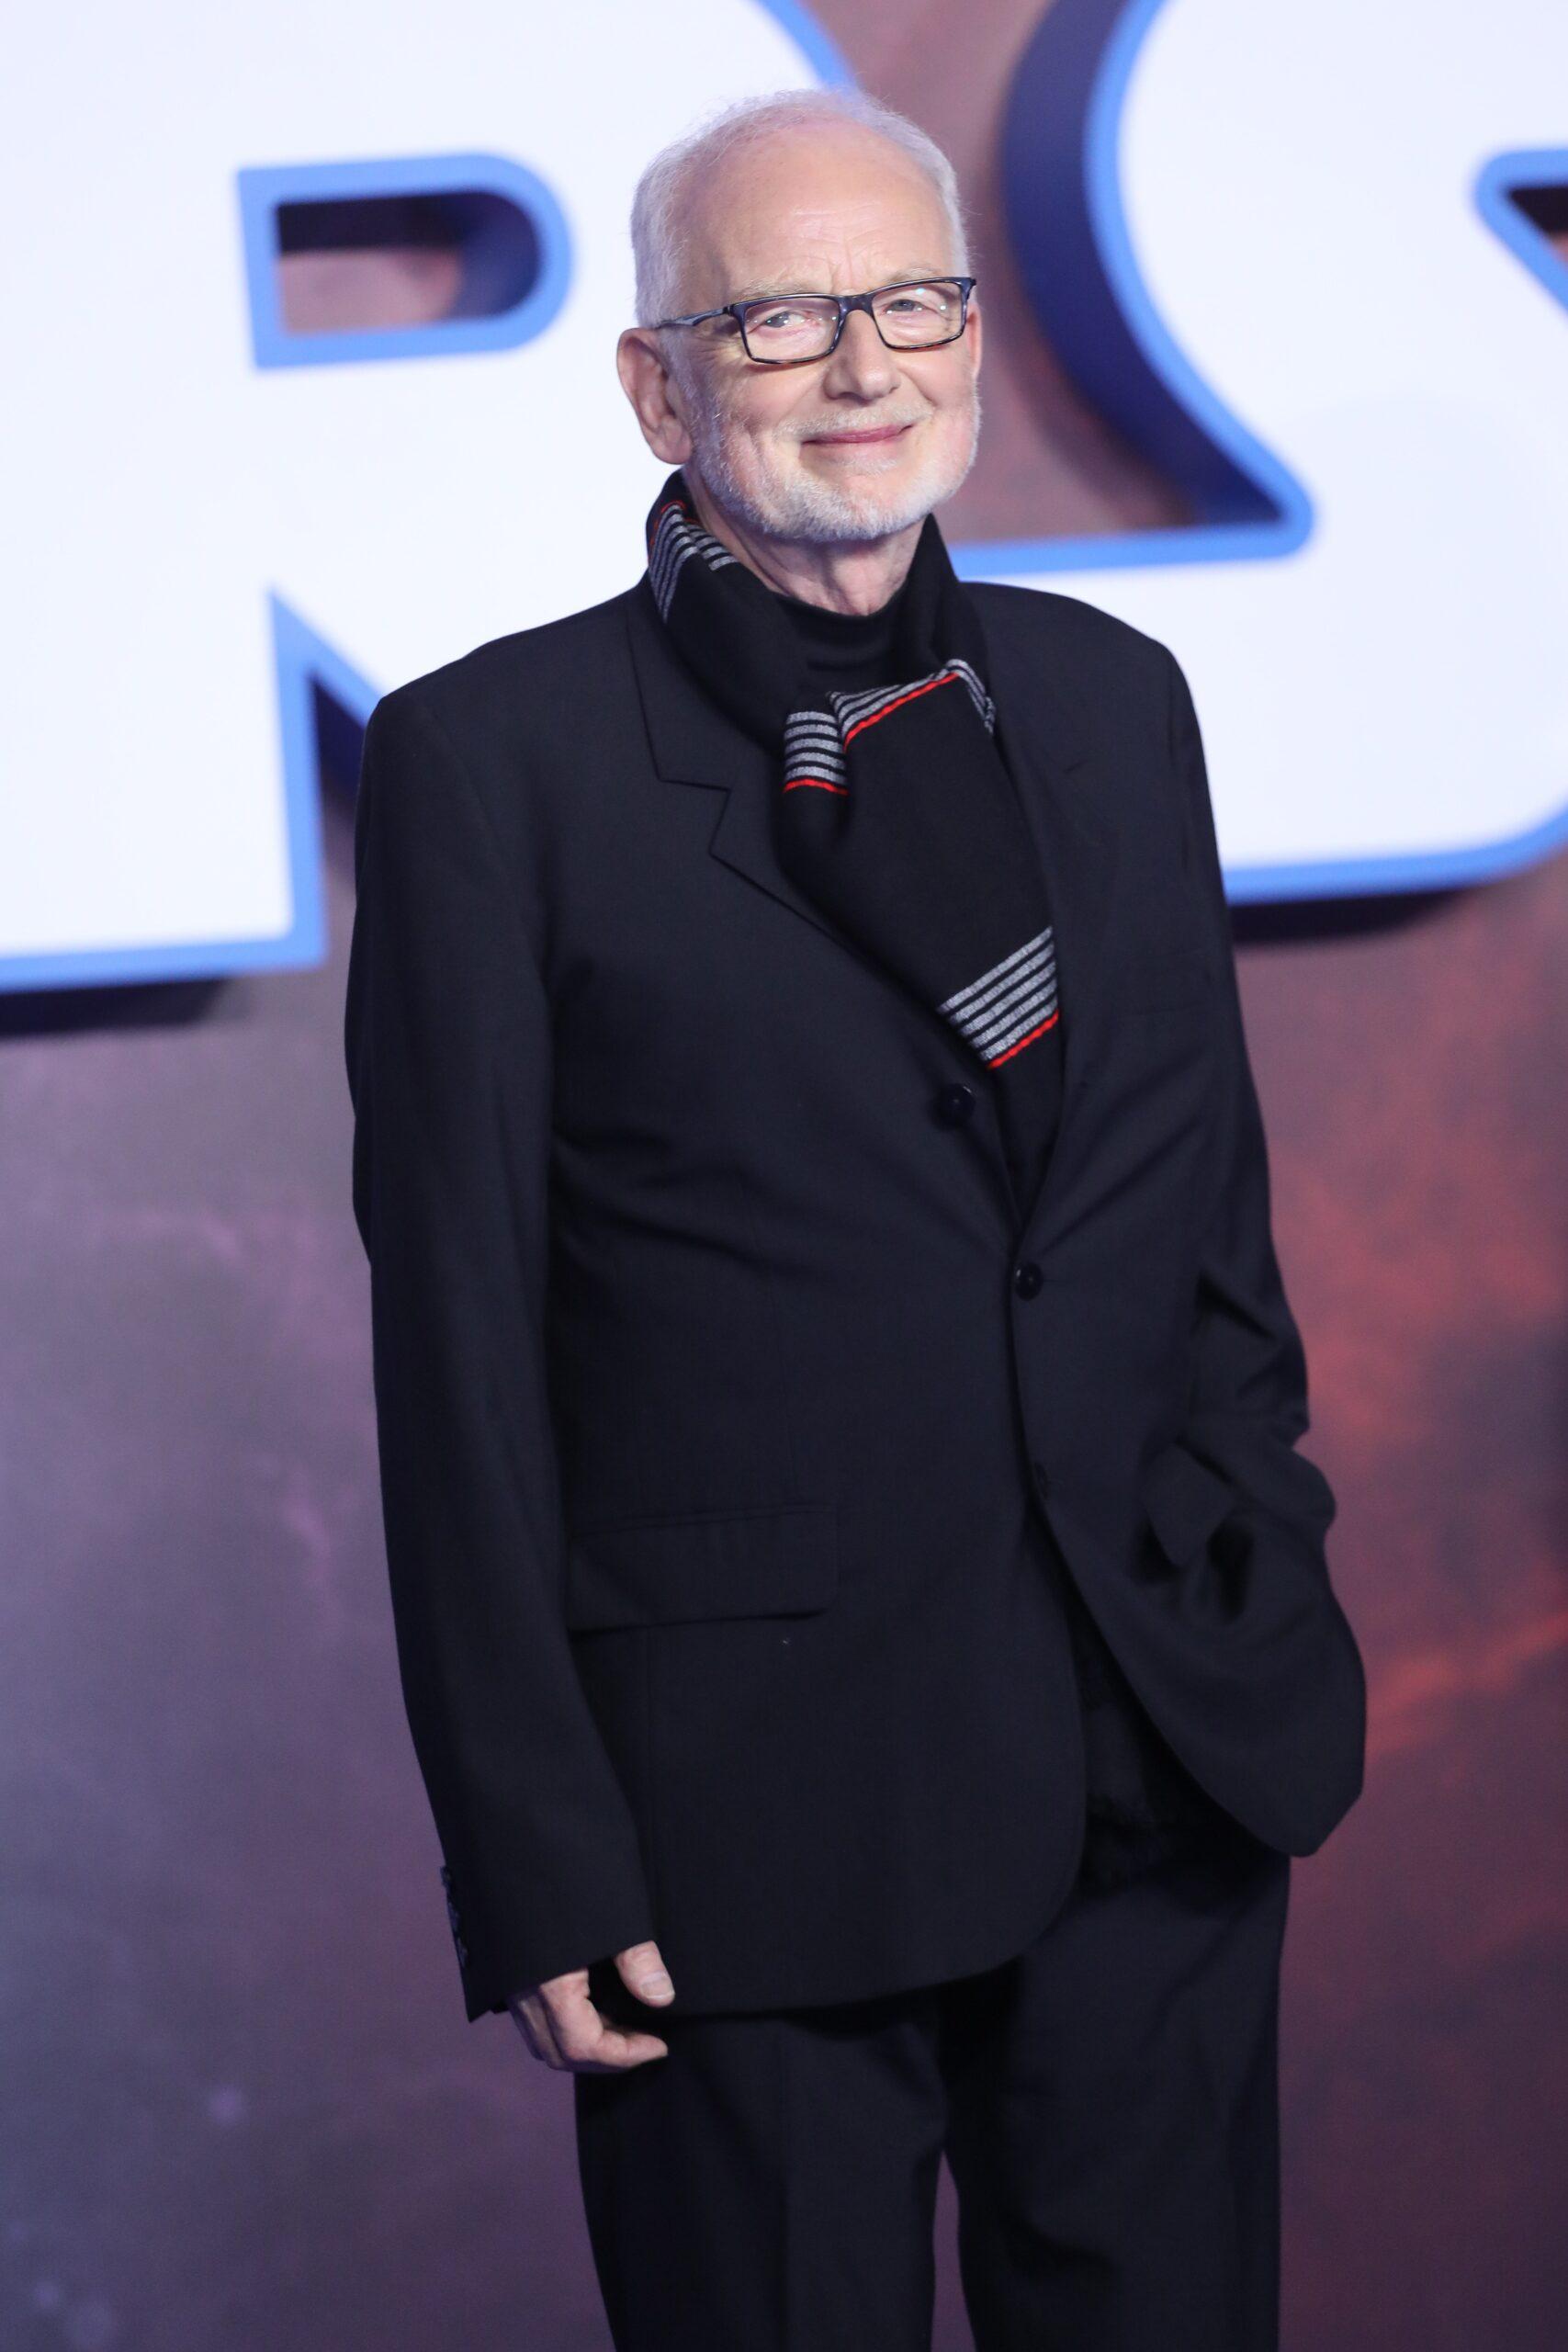 Ian McDiarmid at the Star Wars The Rise of Skywalker UK premiere